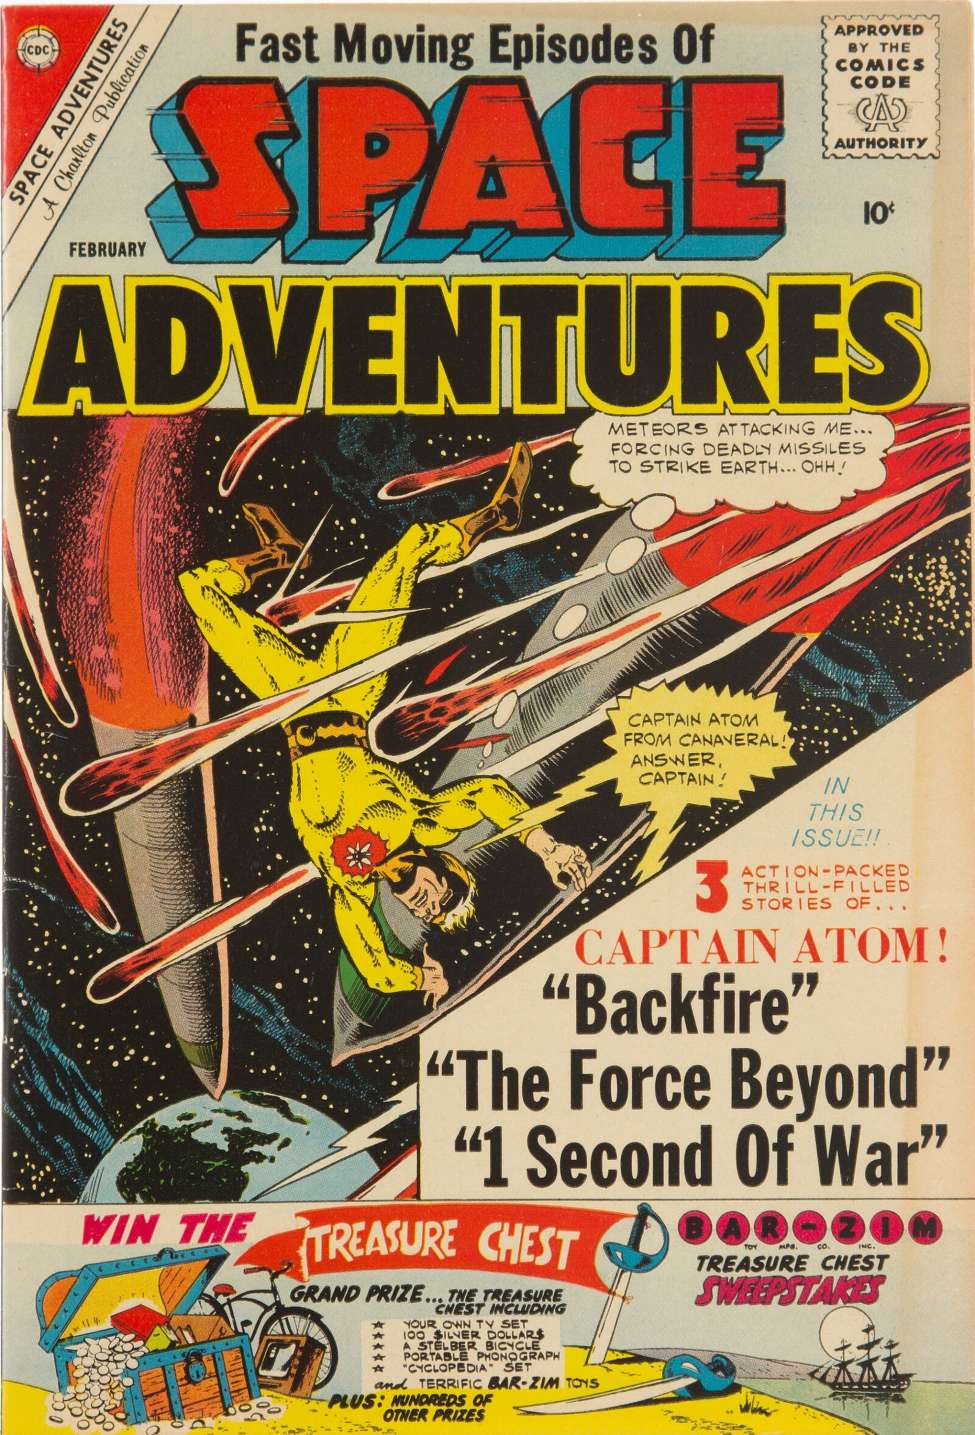 Comic Book Cover For Space Adventures 38 - Version 2